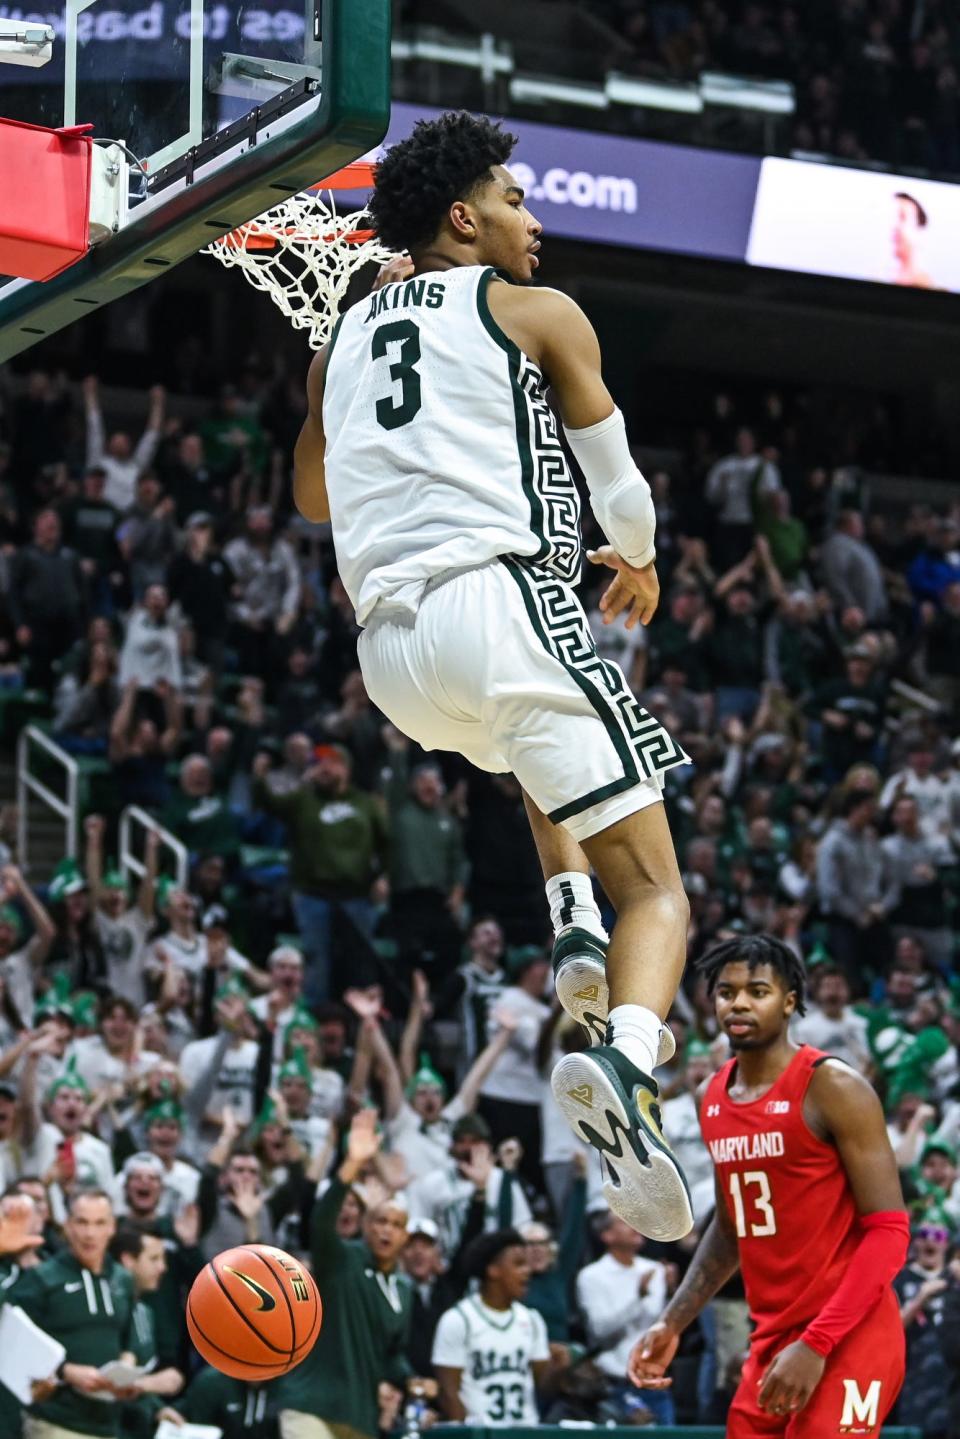 Michigan State's Jaden Akins celebrates after dunking against Maryland during the second half on Tuesday, Feb. 7, 2023, at the Breslin Center in East Lansing.